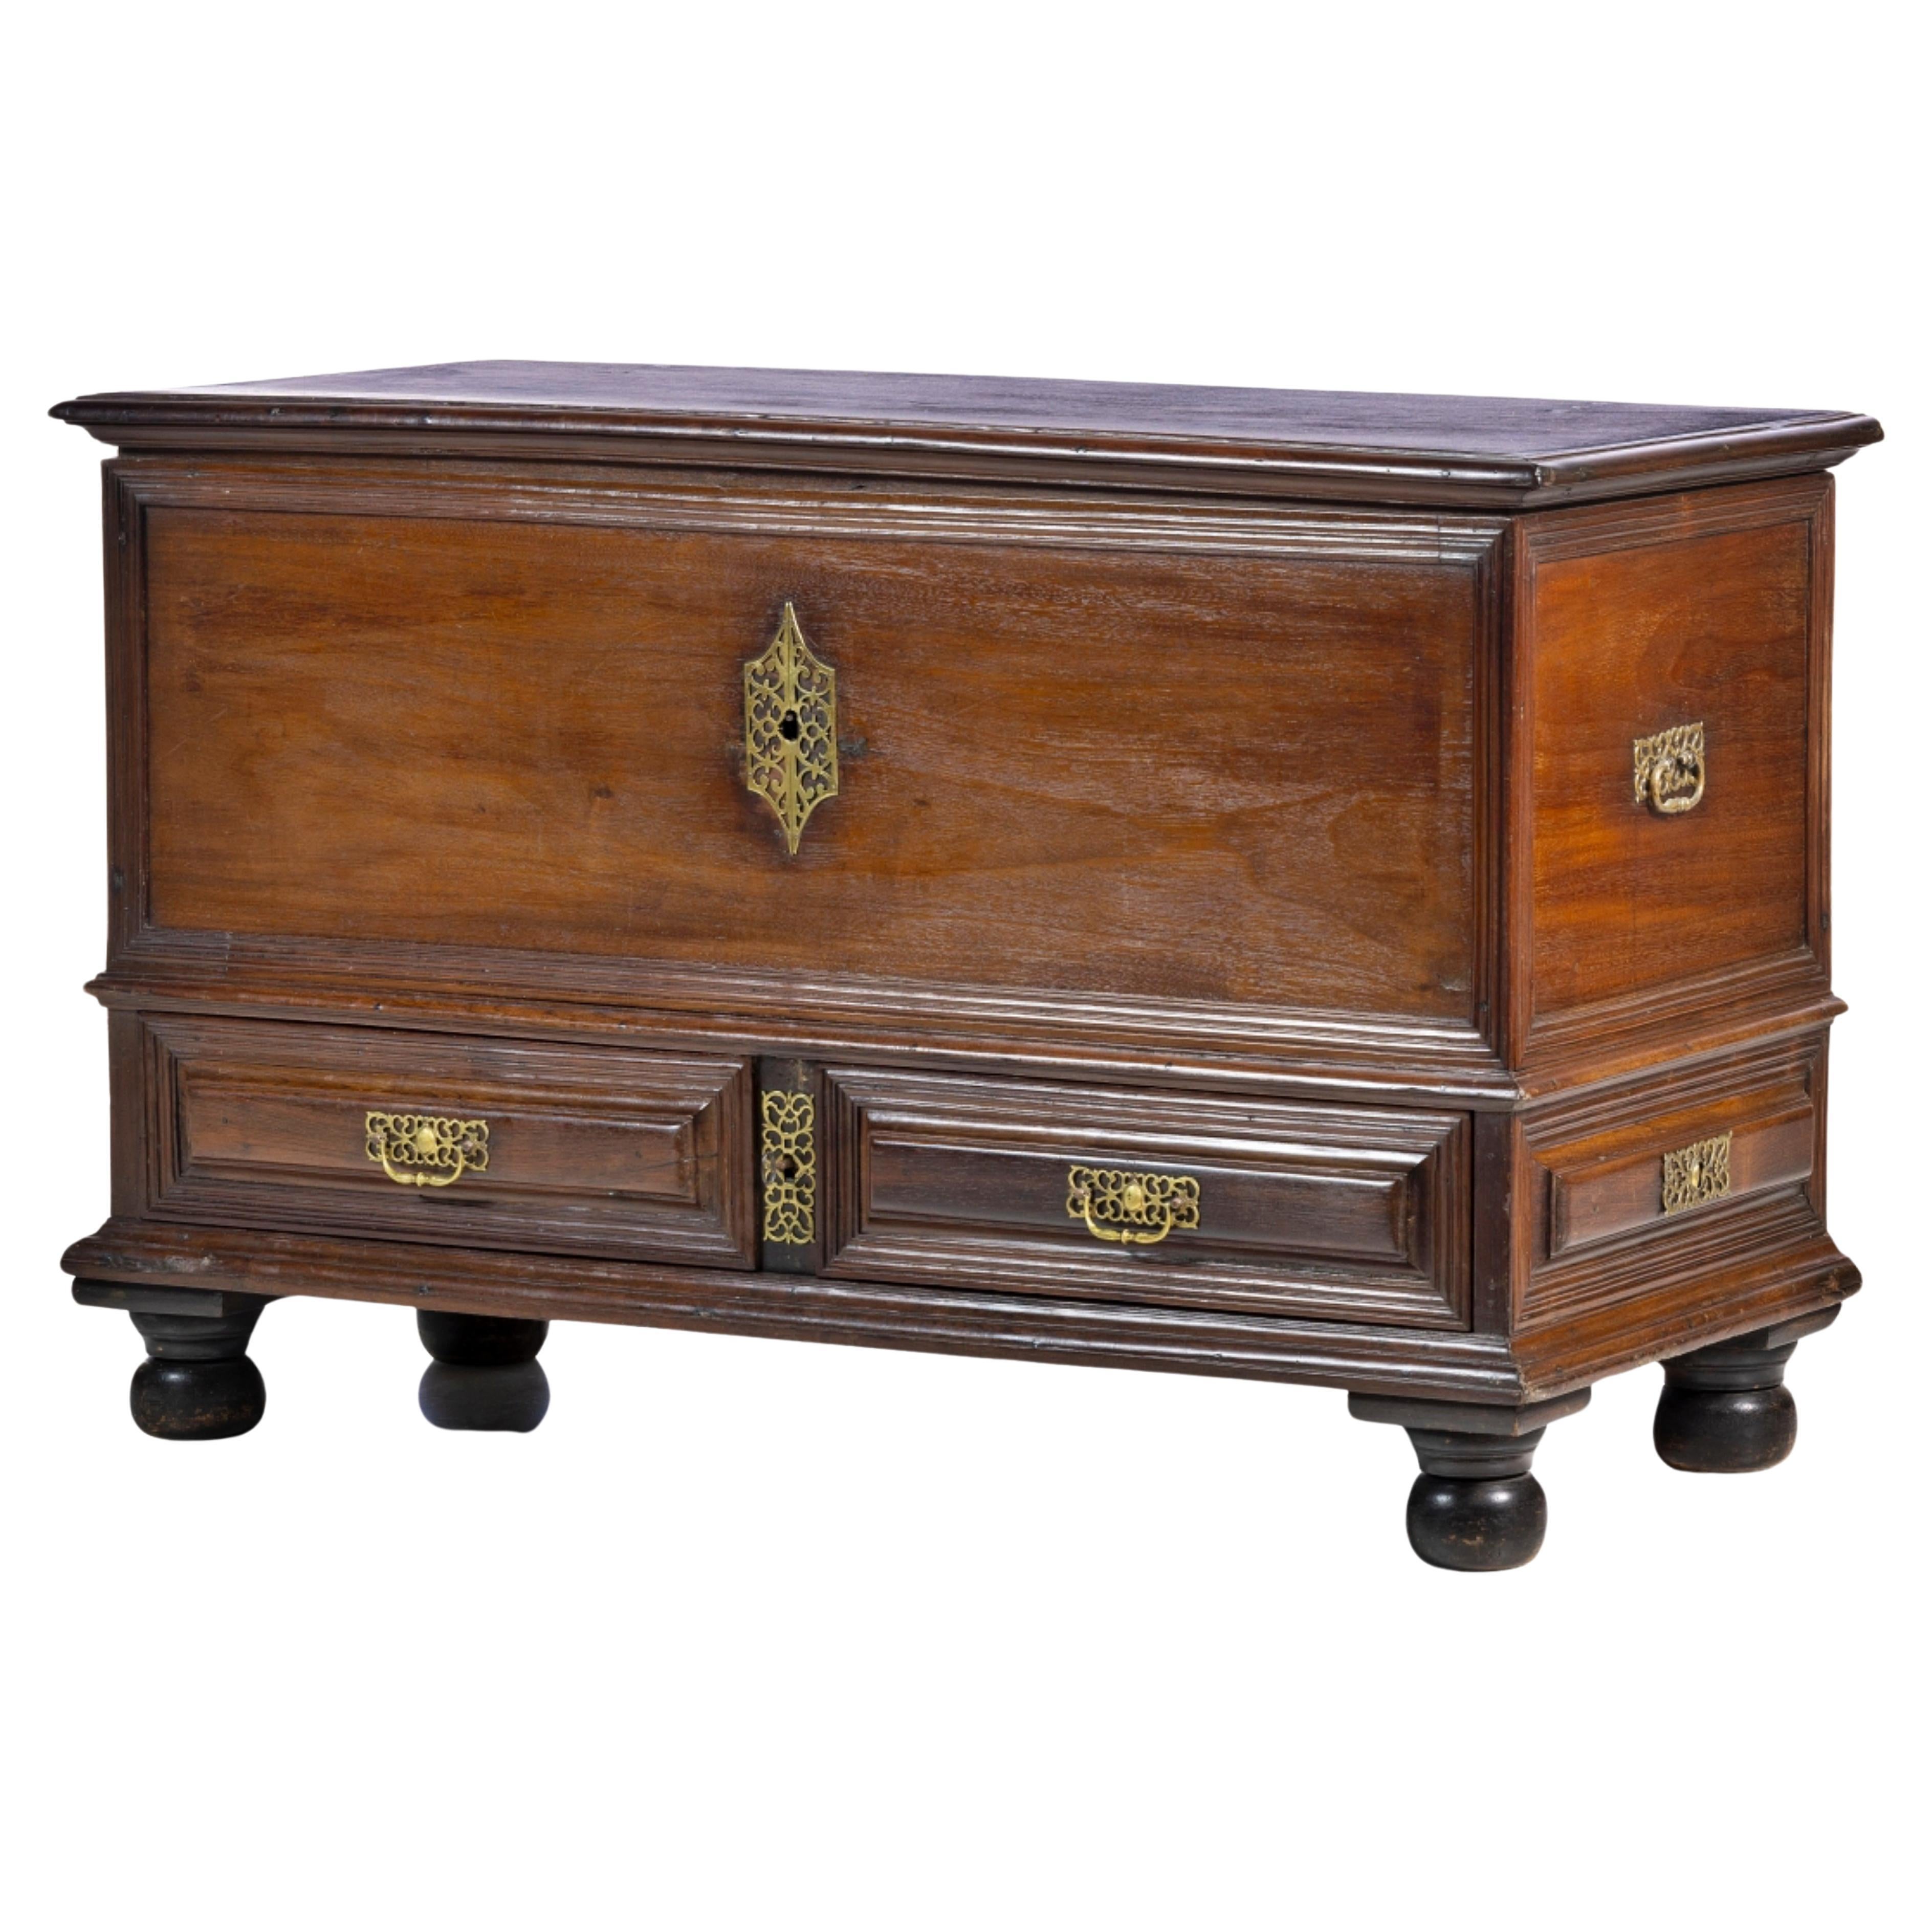 PORTUGUESE CHEST WITH TWO DRAWERS  18th Century